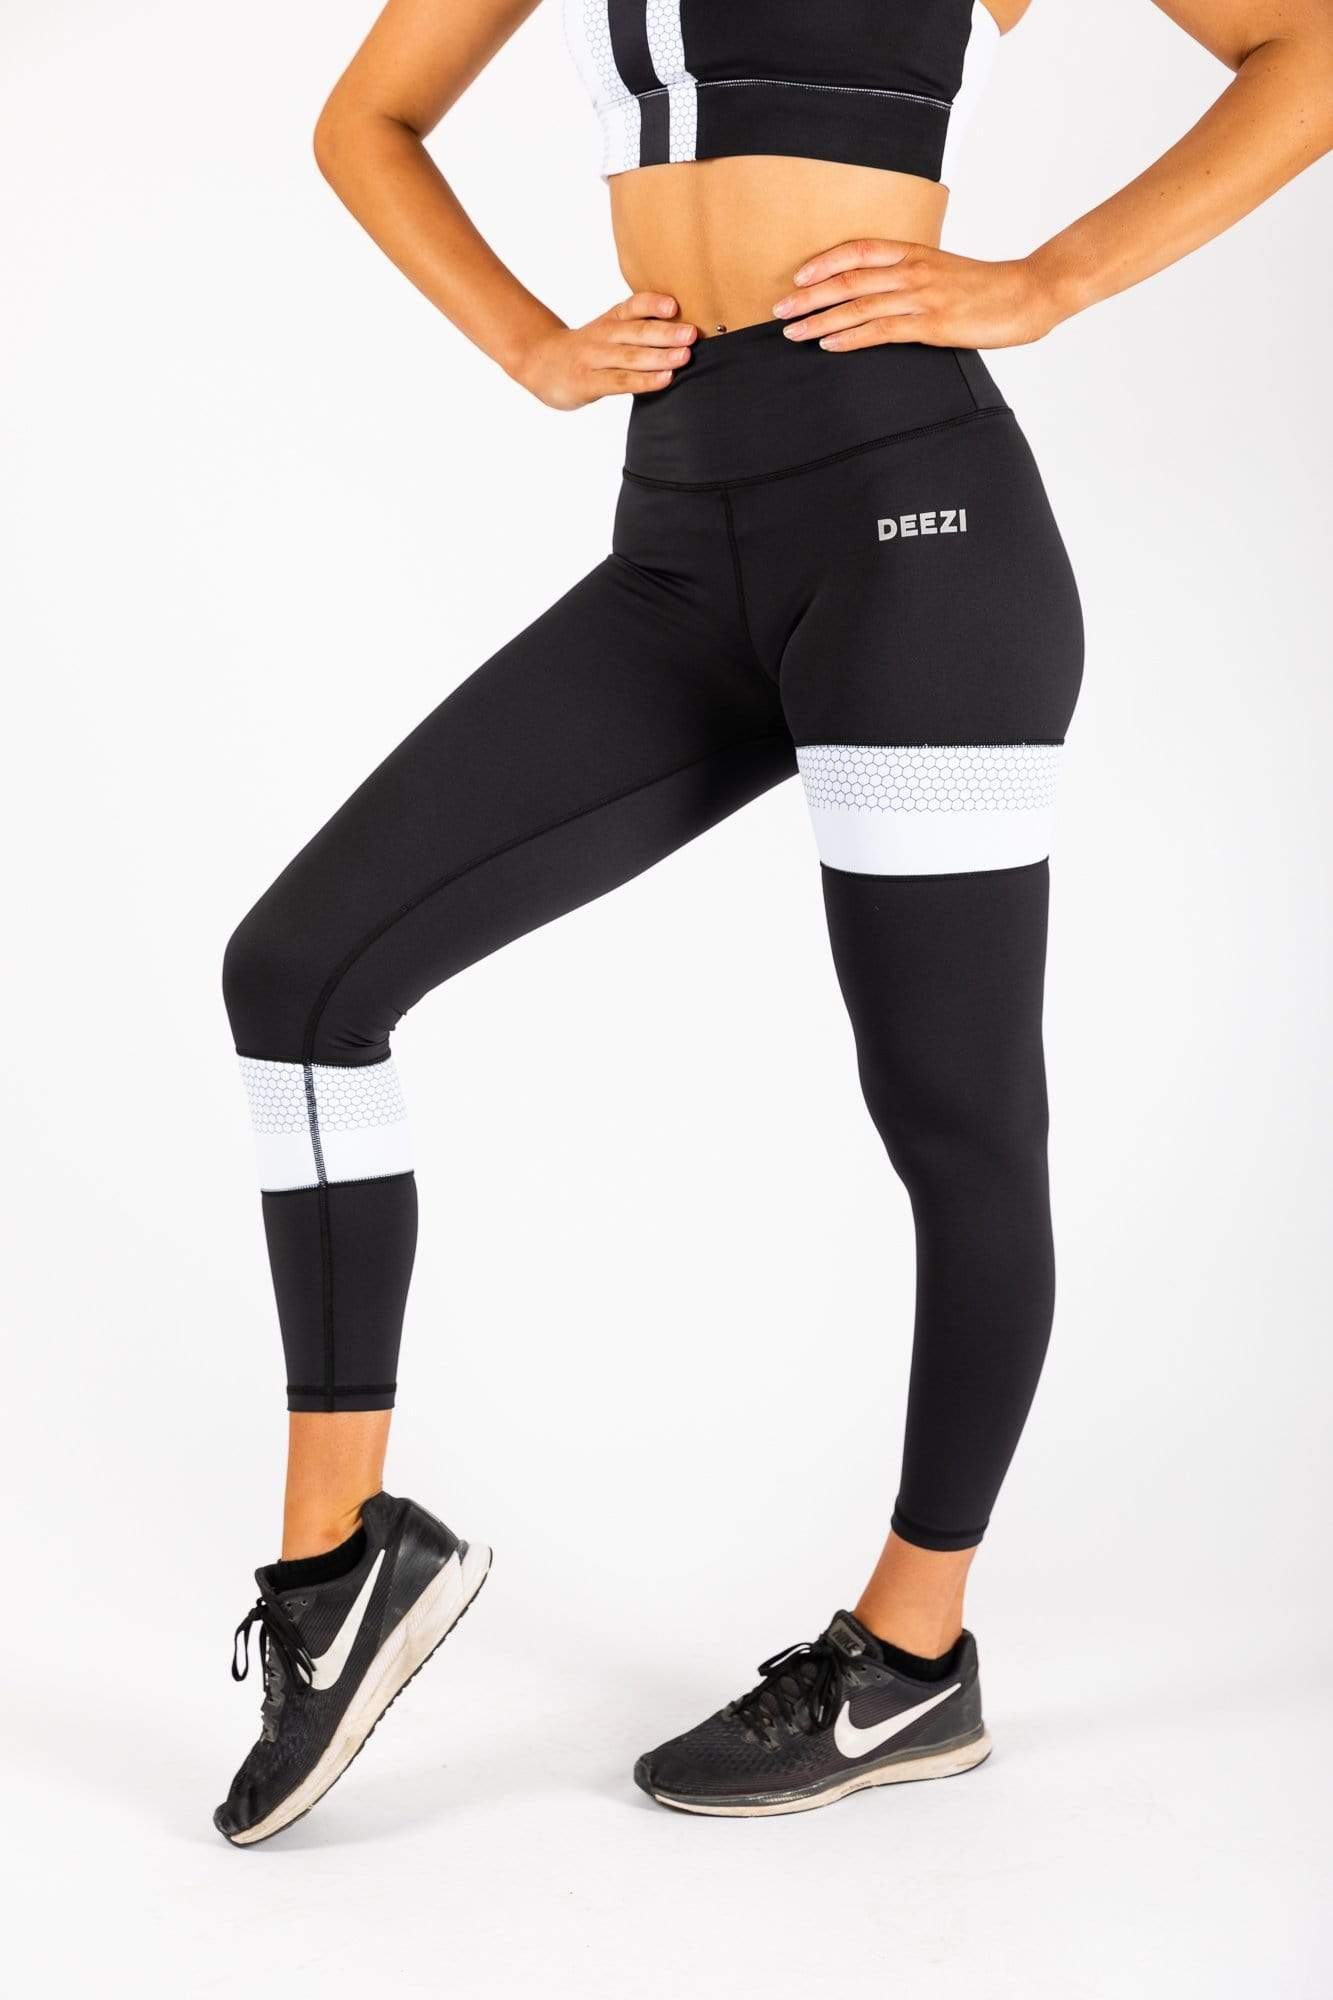 10,000+ Shoppers Just Bought These $24 Fleece-Lined Tights at